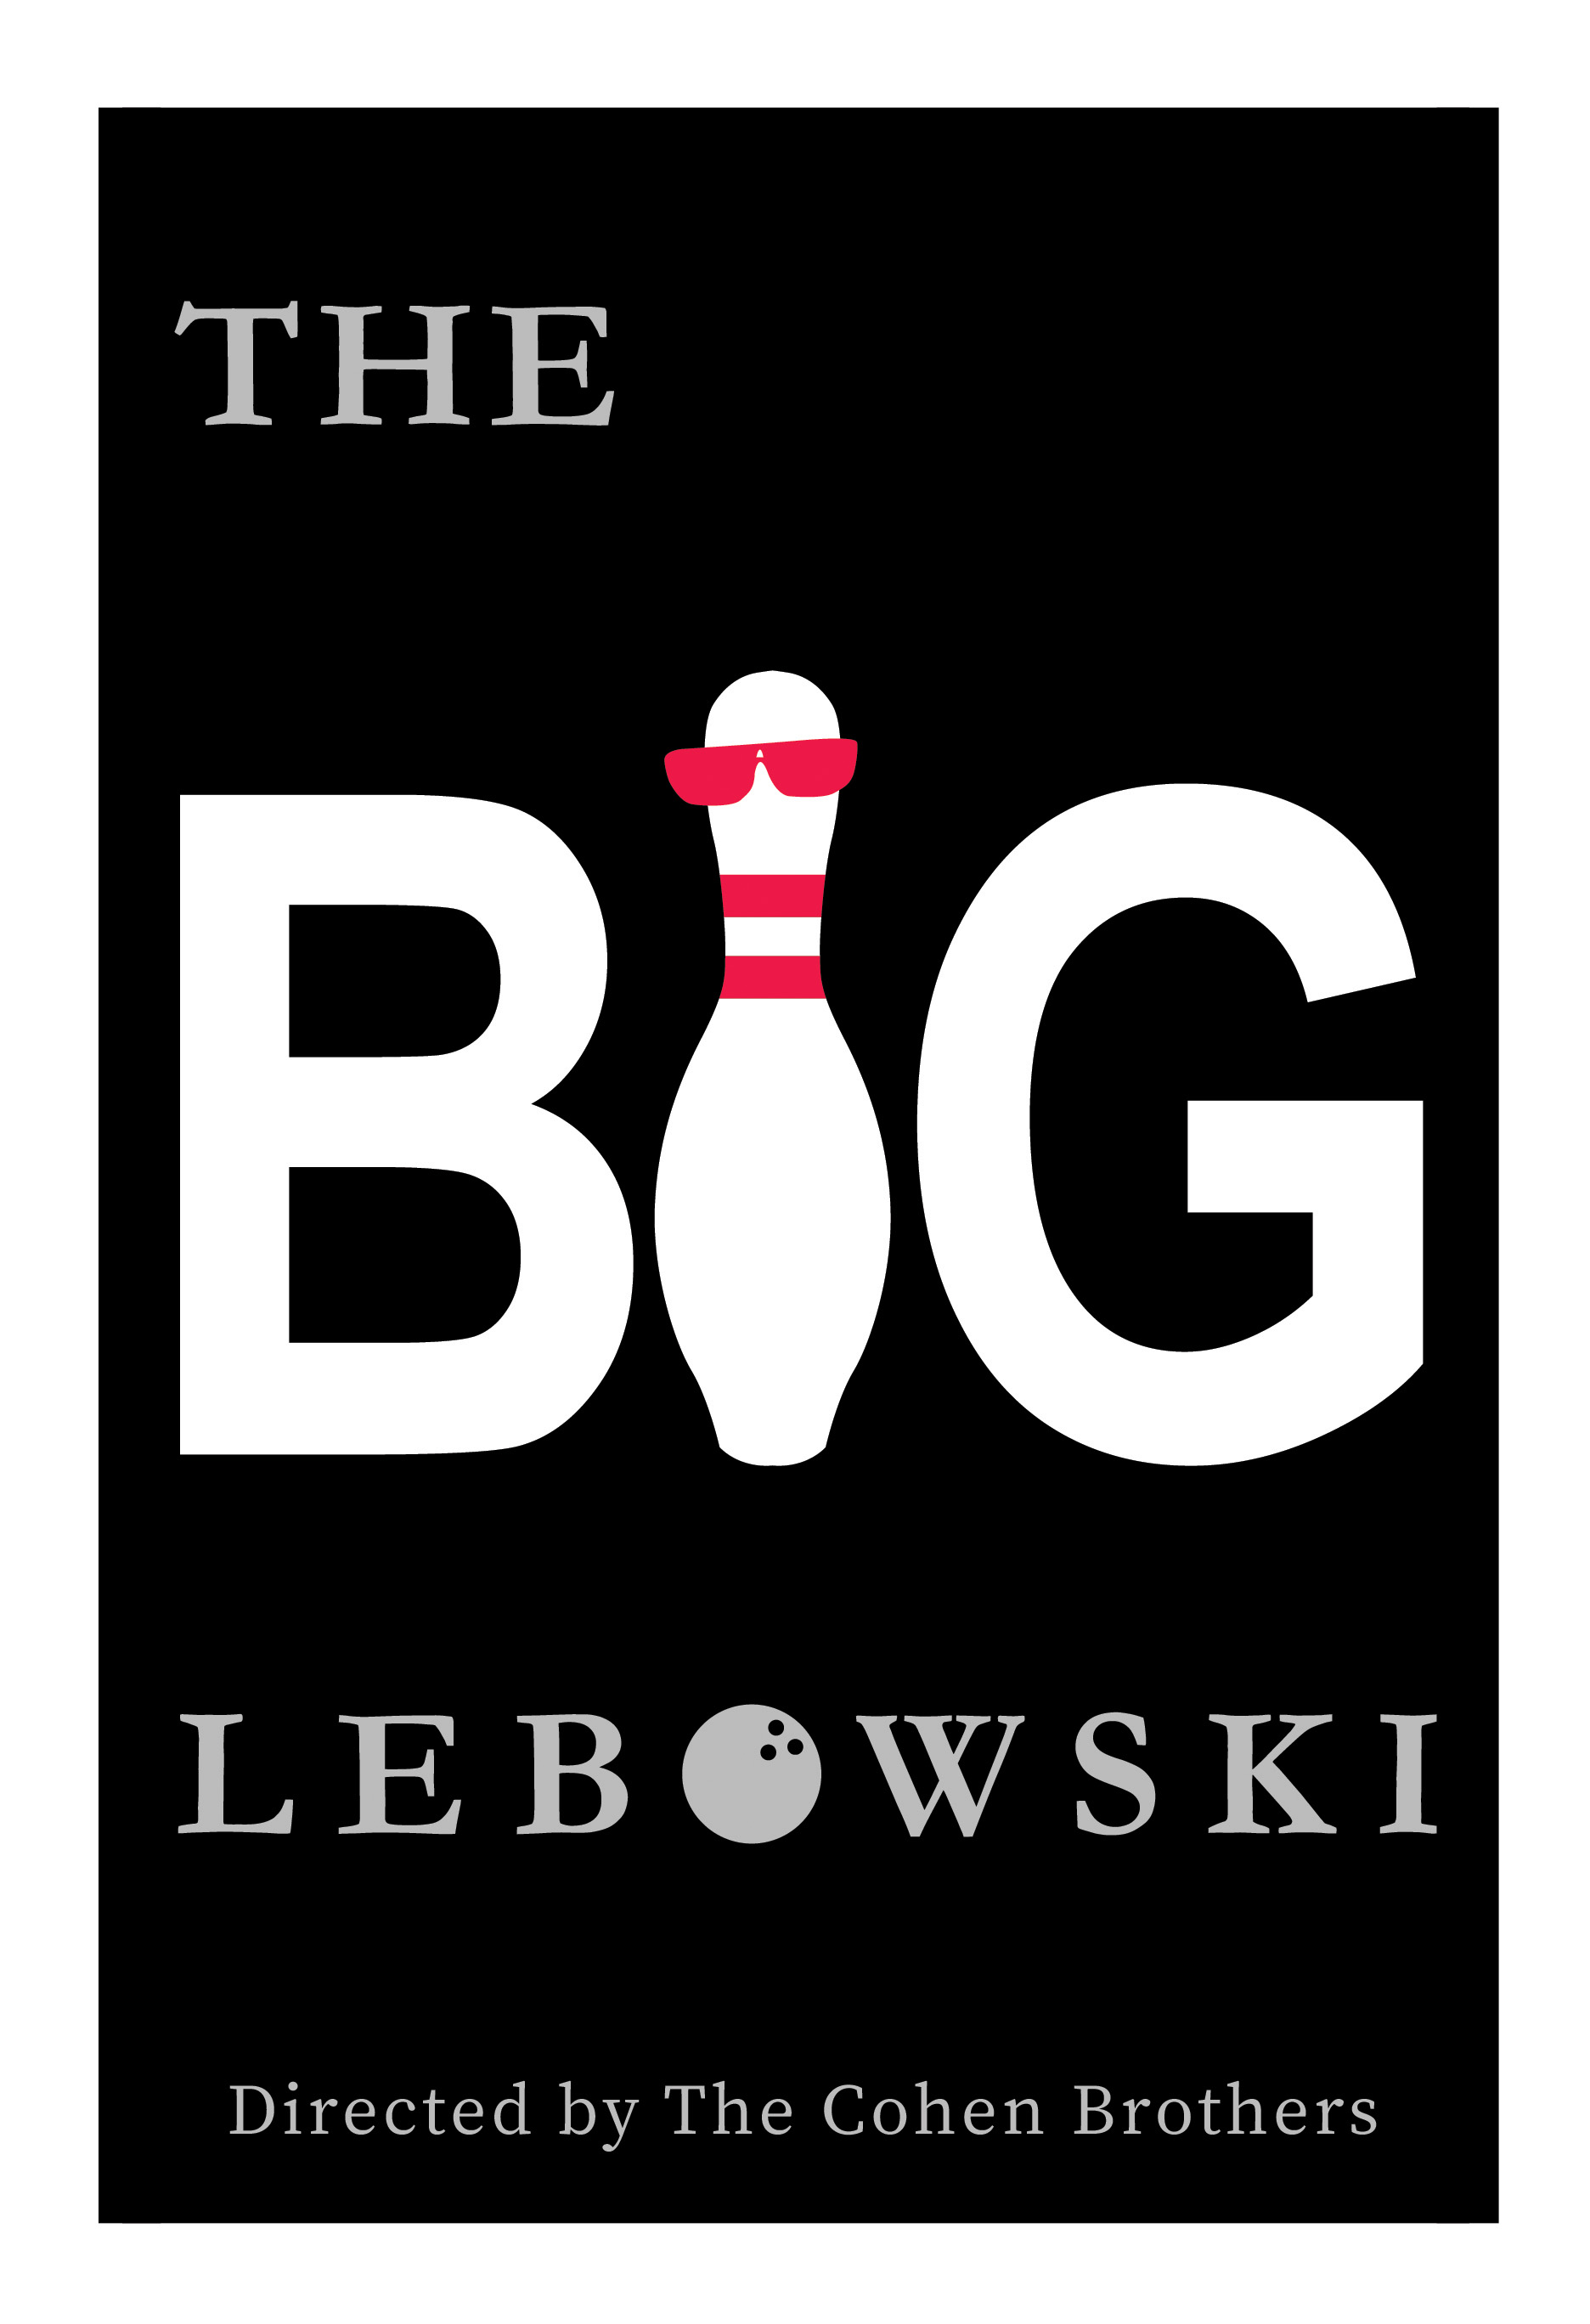 A poster of the film 'The Big Lebowski' in black with the letter 'i' replaced with a bowling pin and sporting the sunglasses of the protagonist, 'The Dude'.